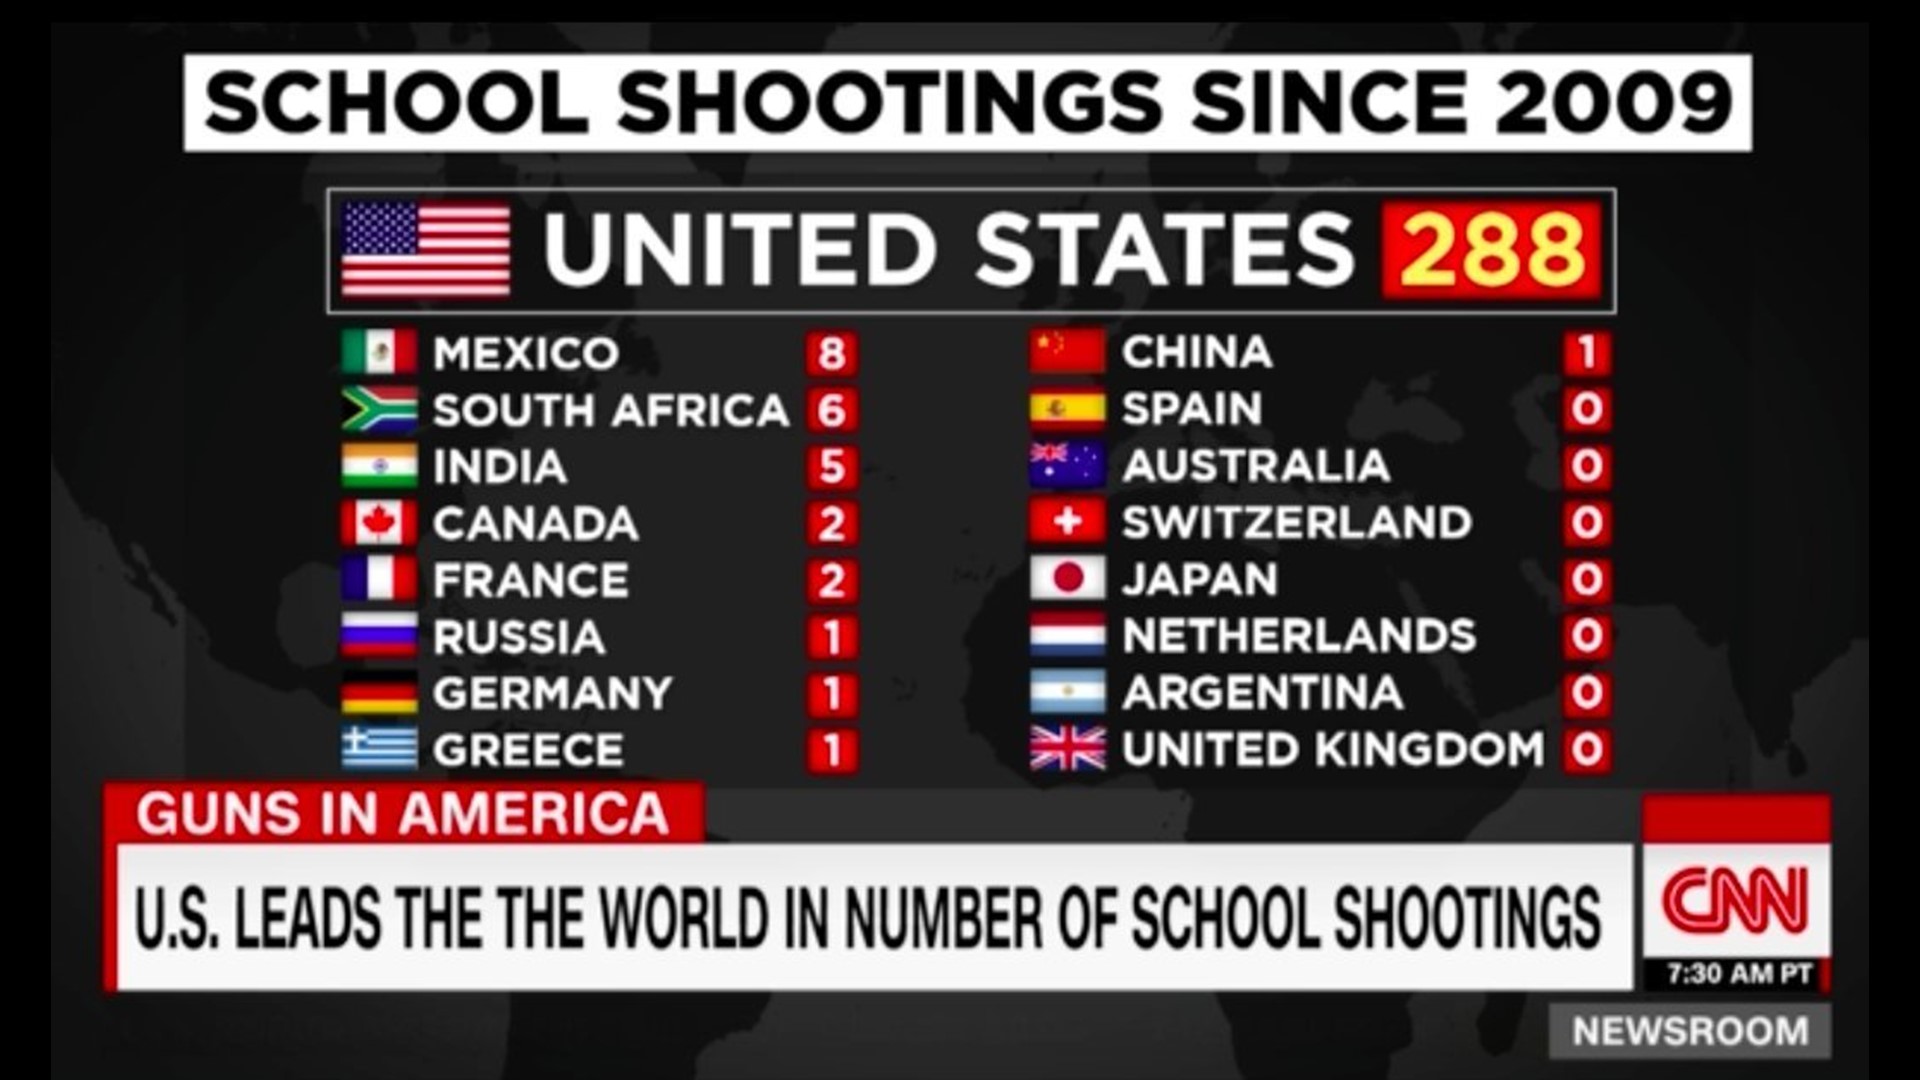 The US has had 57 times as many school shootings as the other major